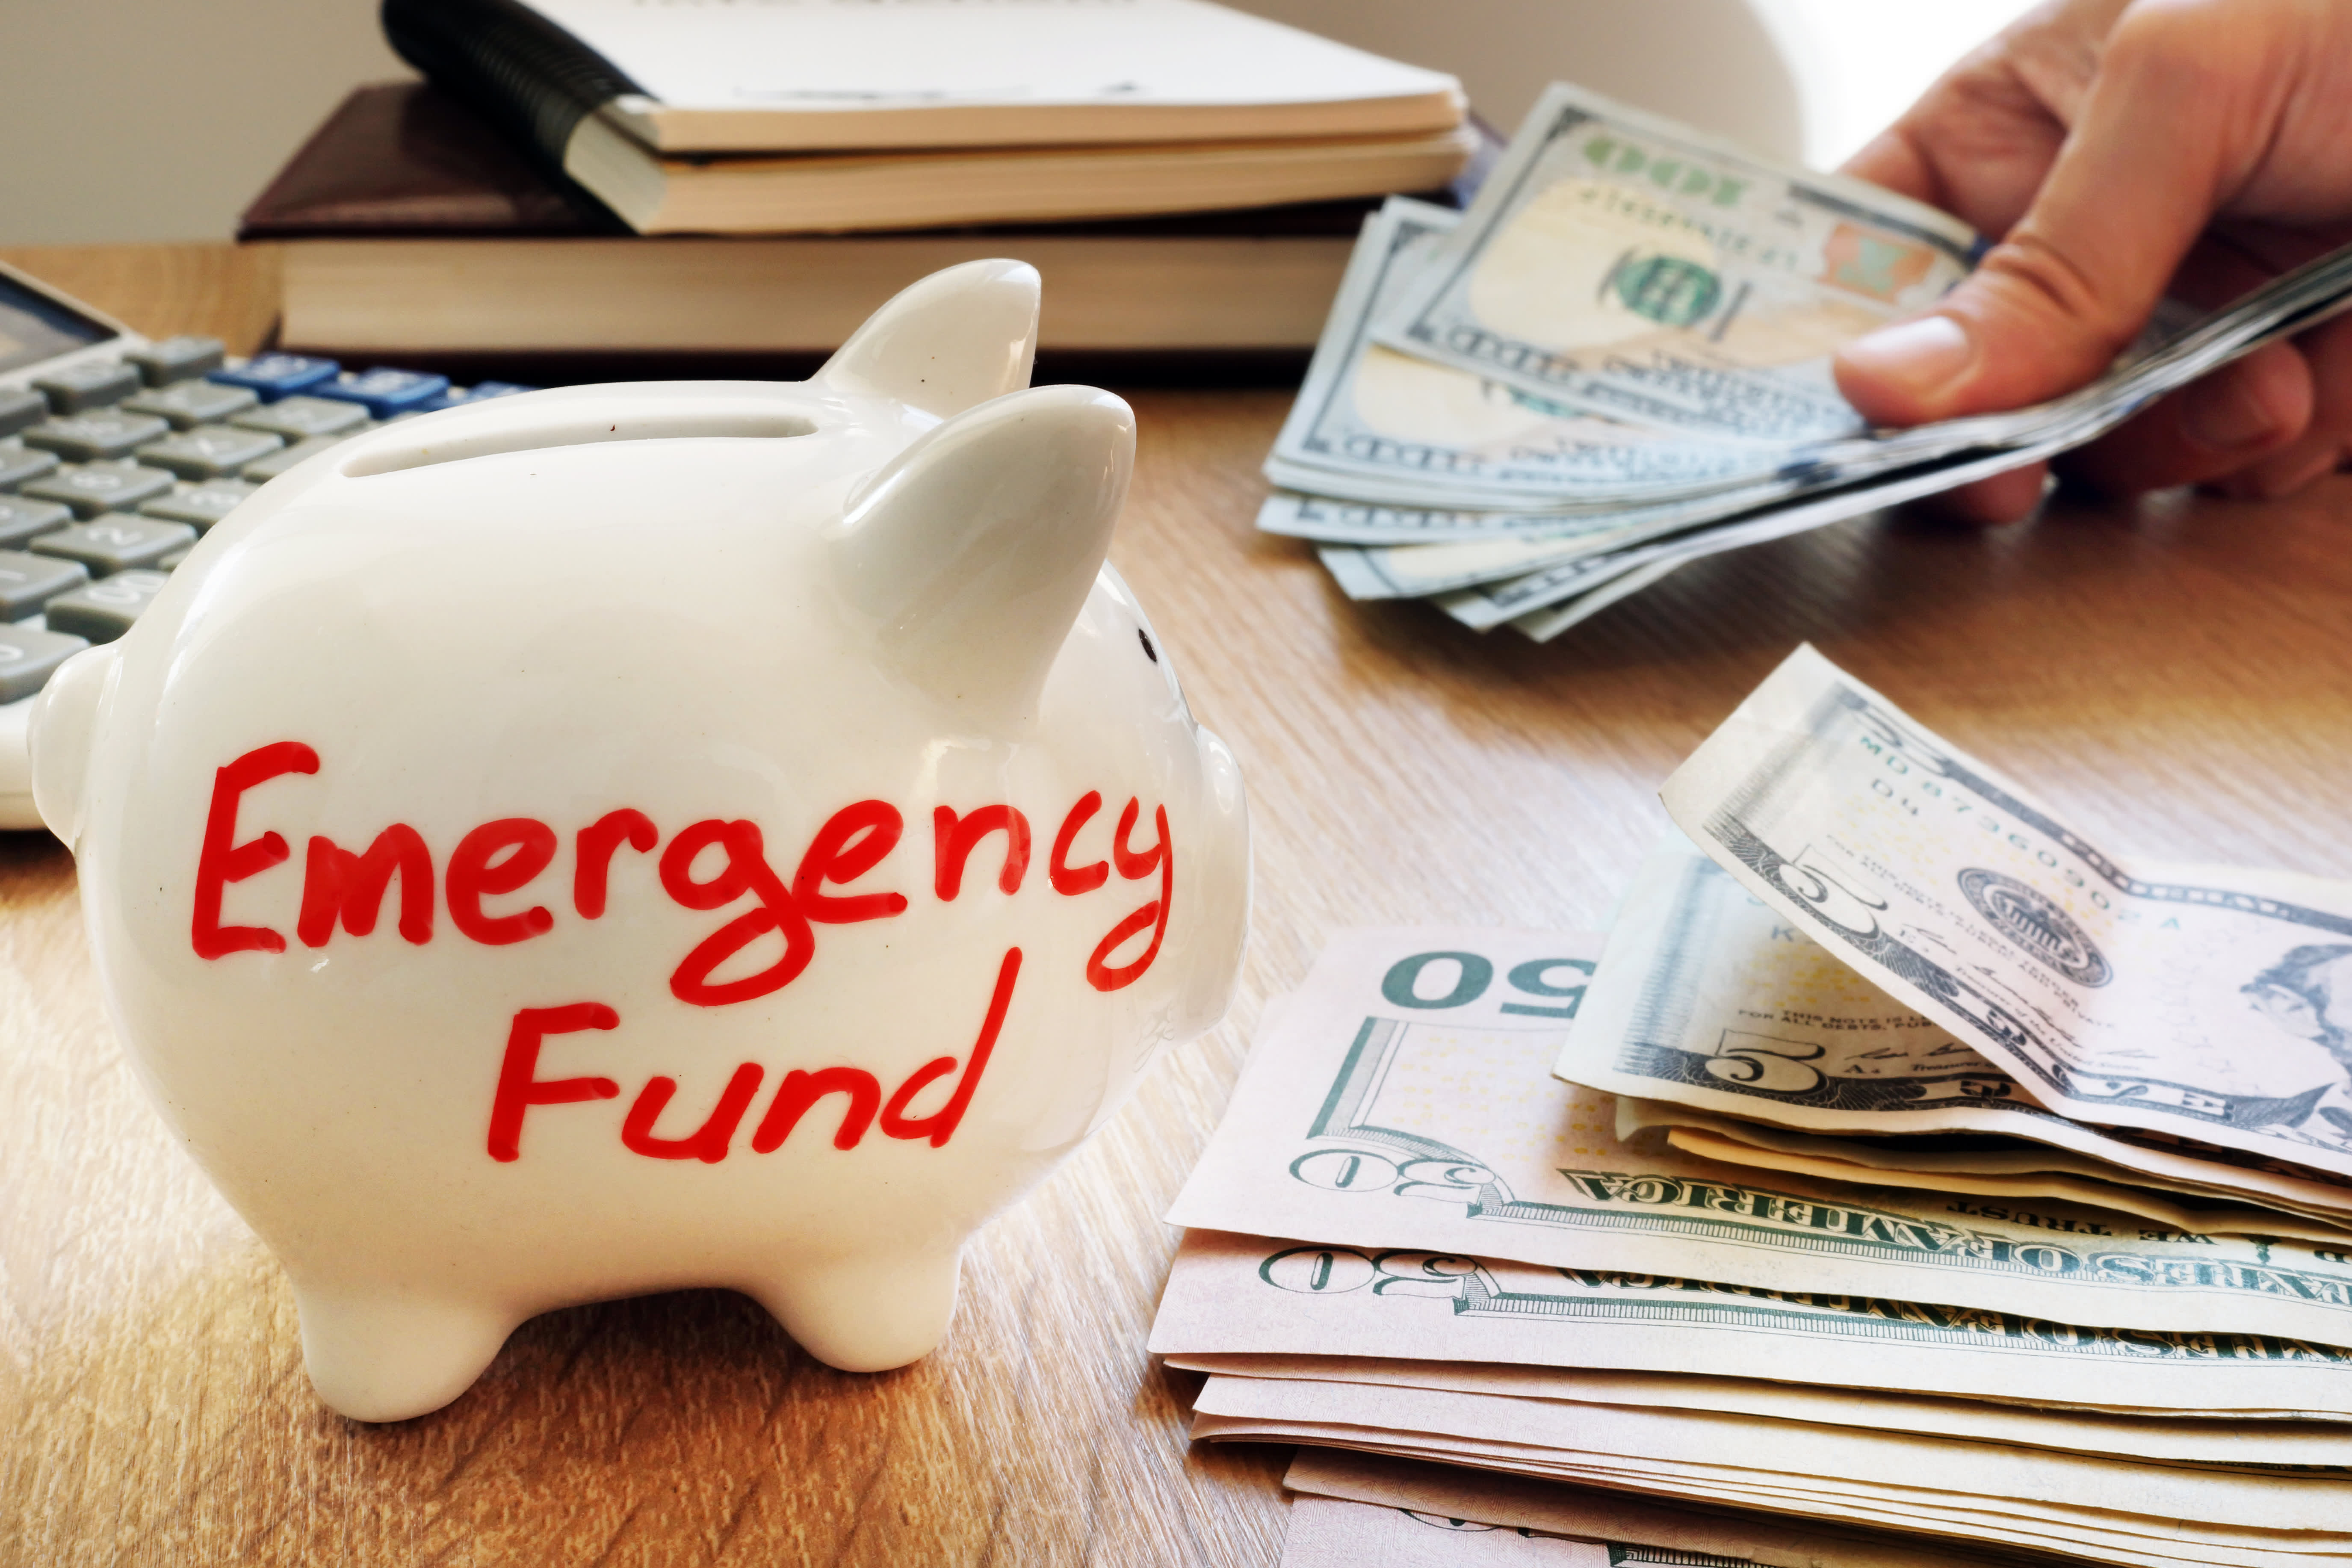 61% of Americans will run out of emergency savings by the end of the year—here's how to reduce expenses now